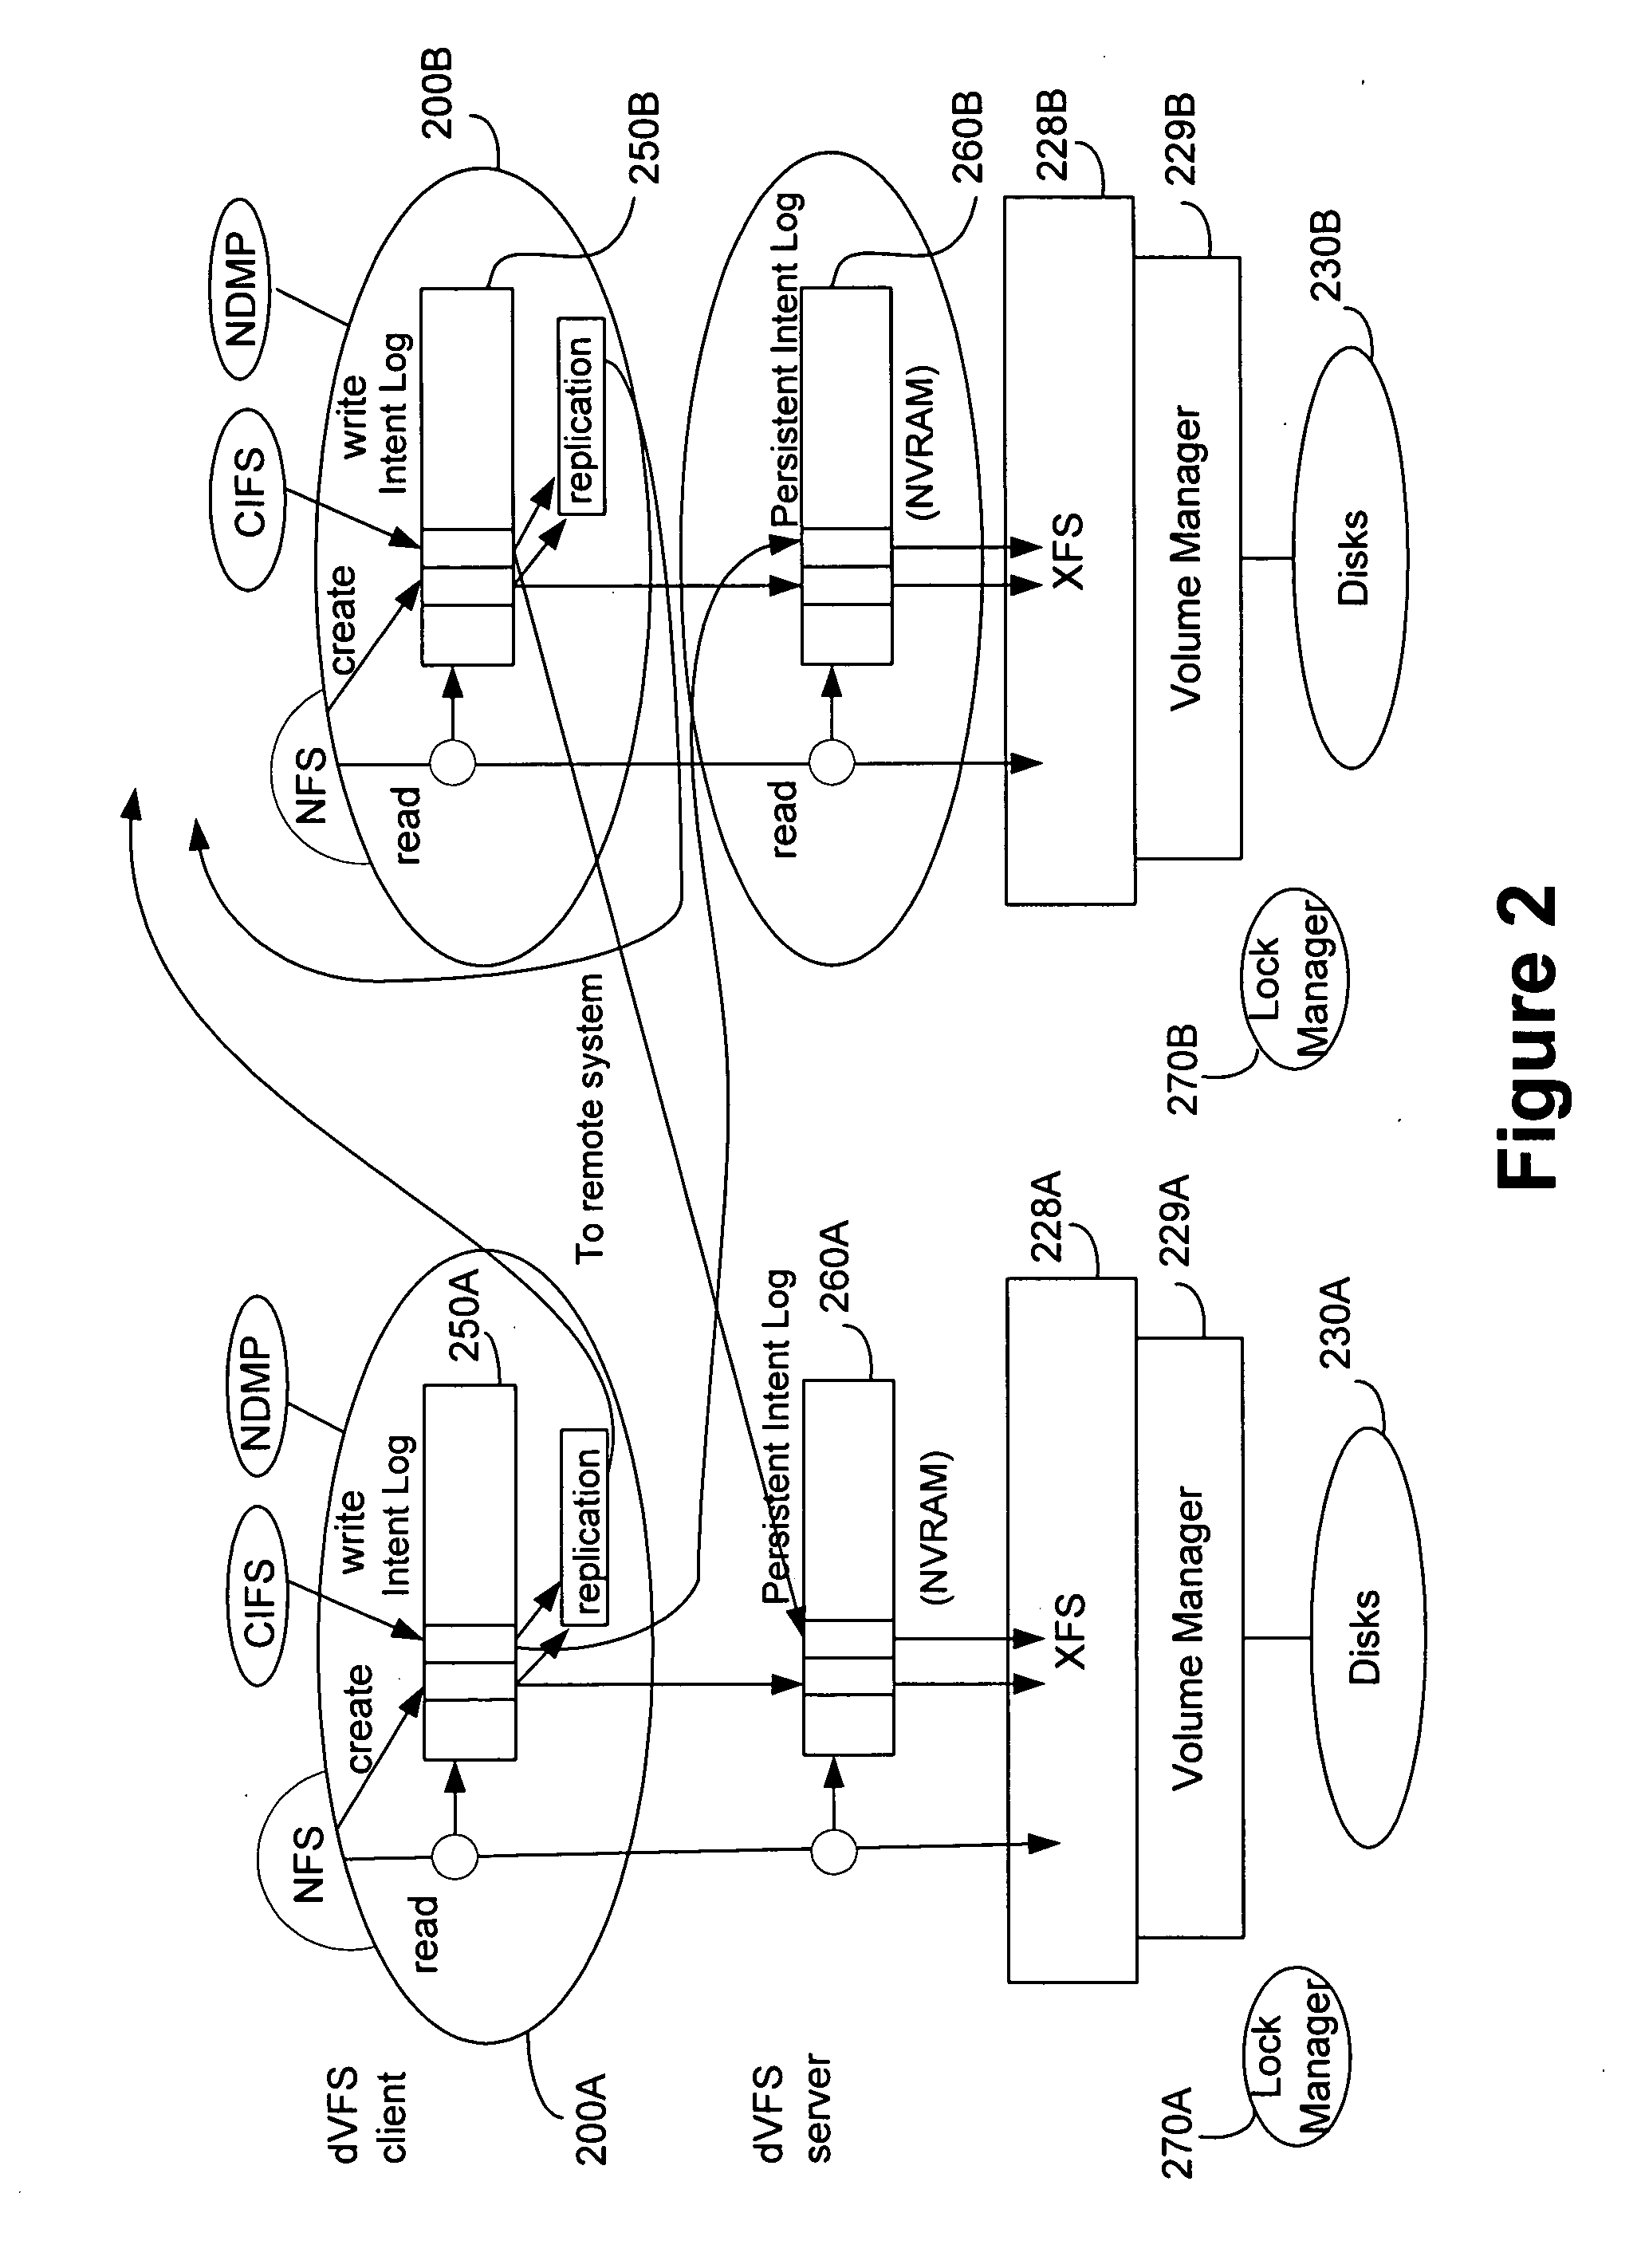 Method and apparatus for implementing a file system